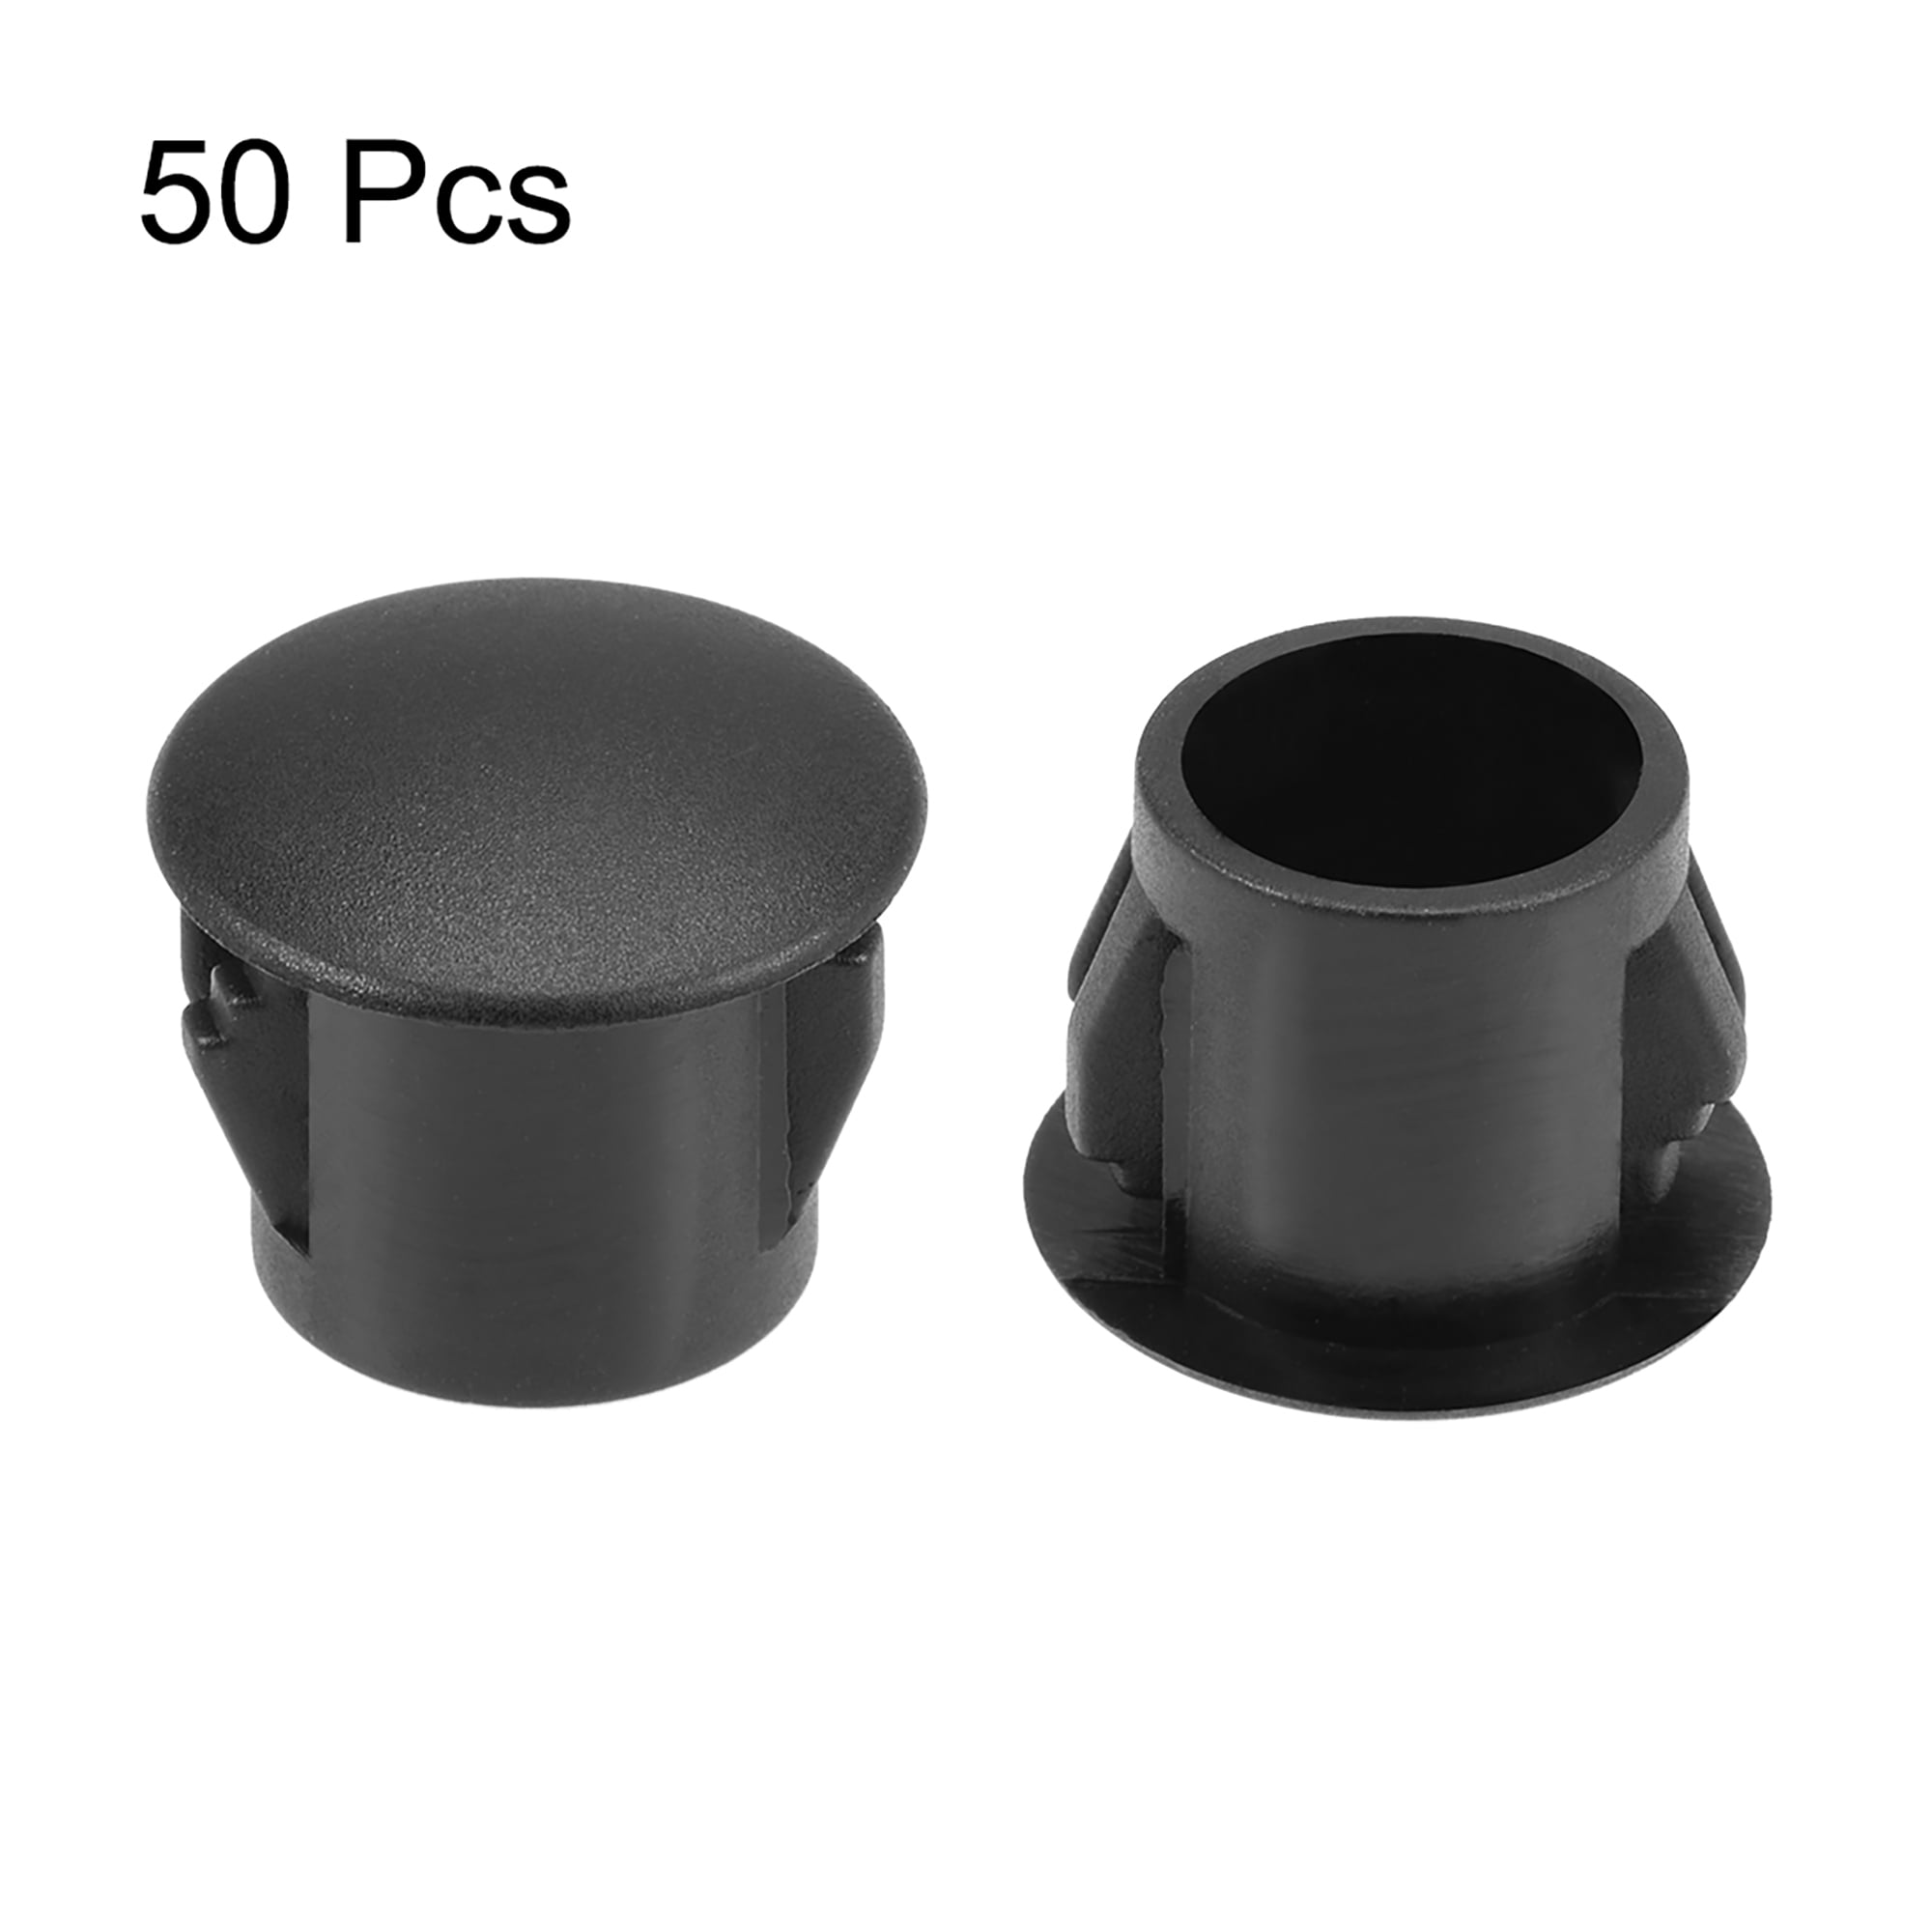 7/16 Hole Plugs for 1/8-3/8" thick panels Flat Head Black Push In 